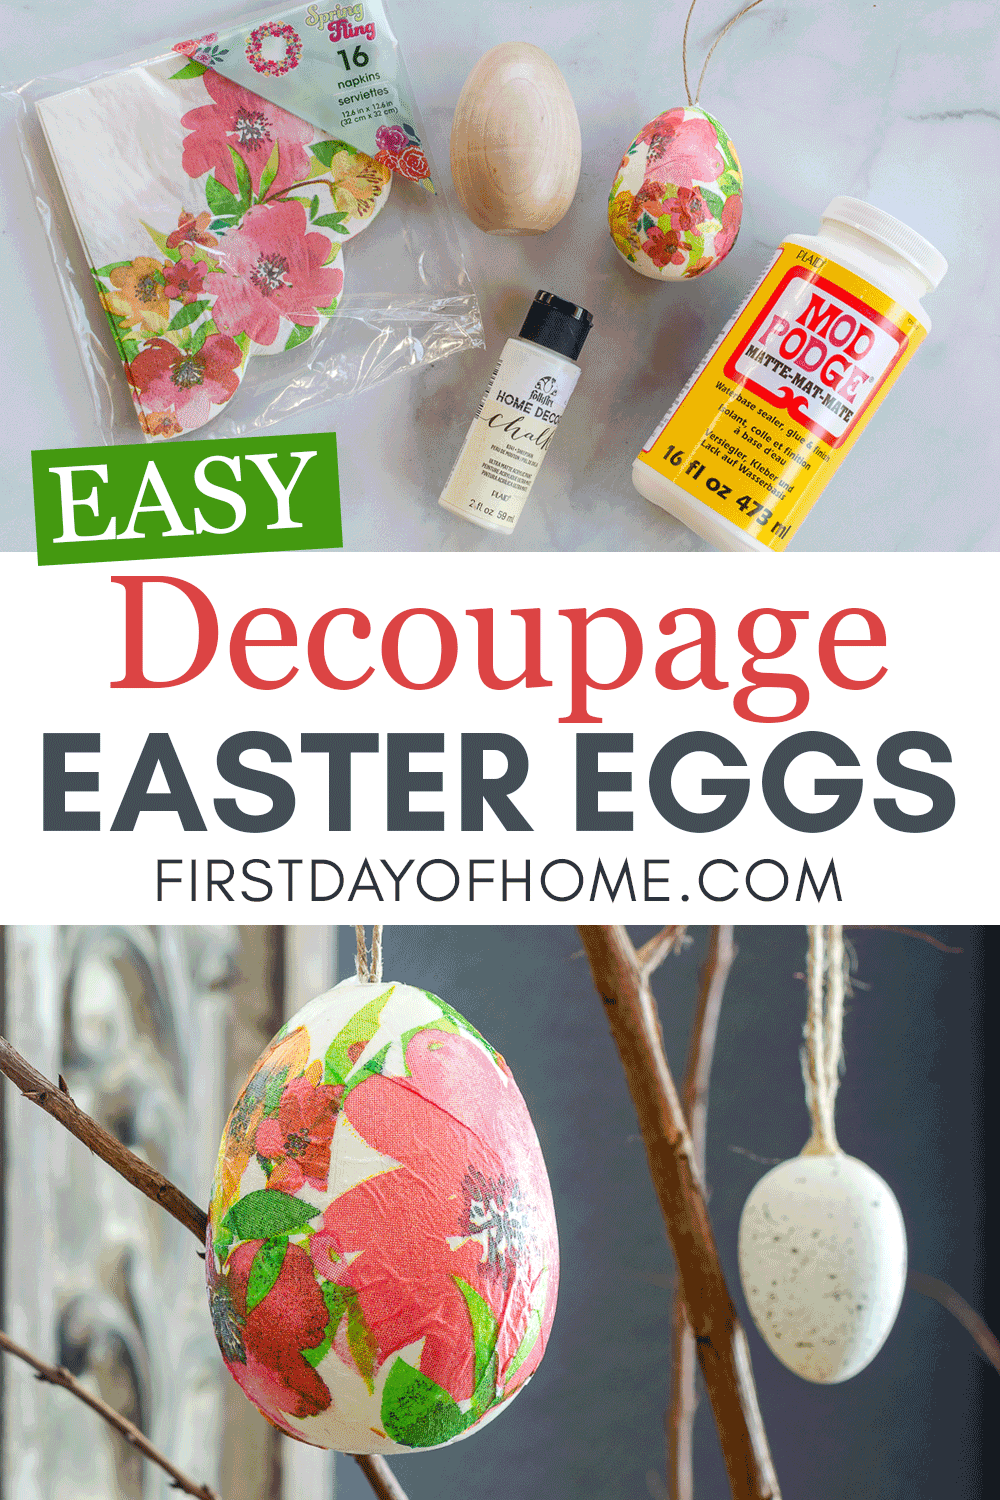 Decoupage Easter egg supplies and hanging ornament.